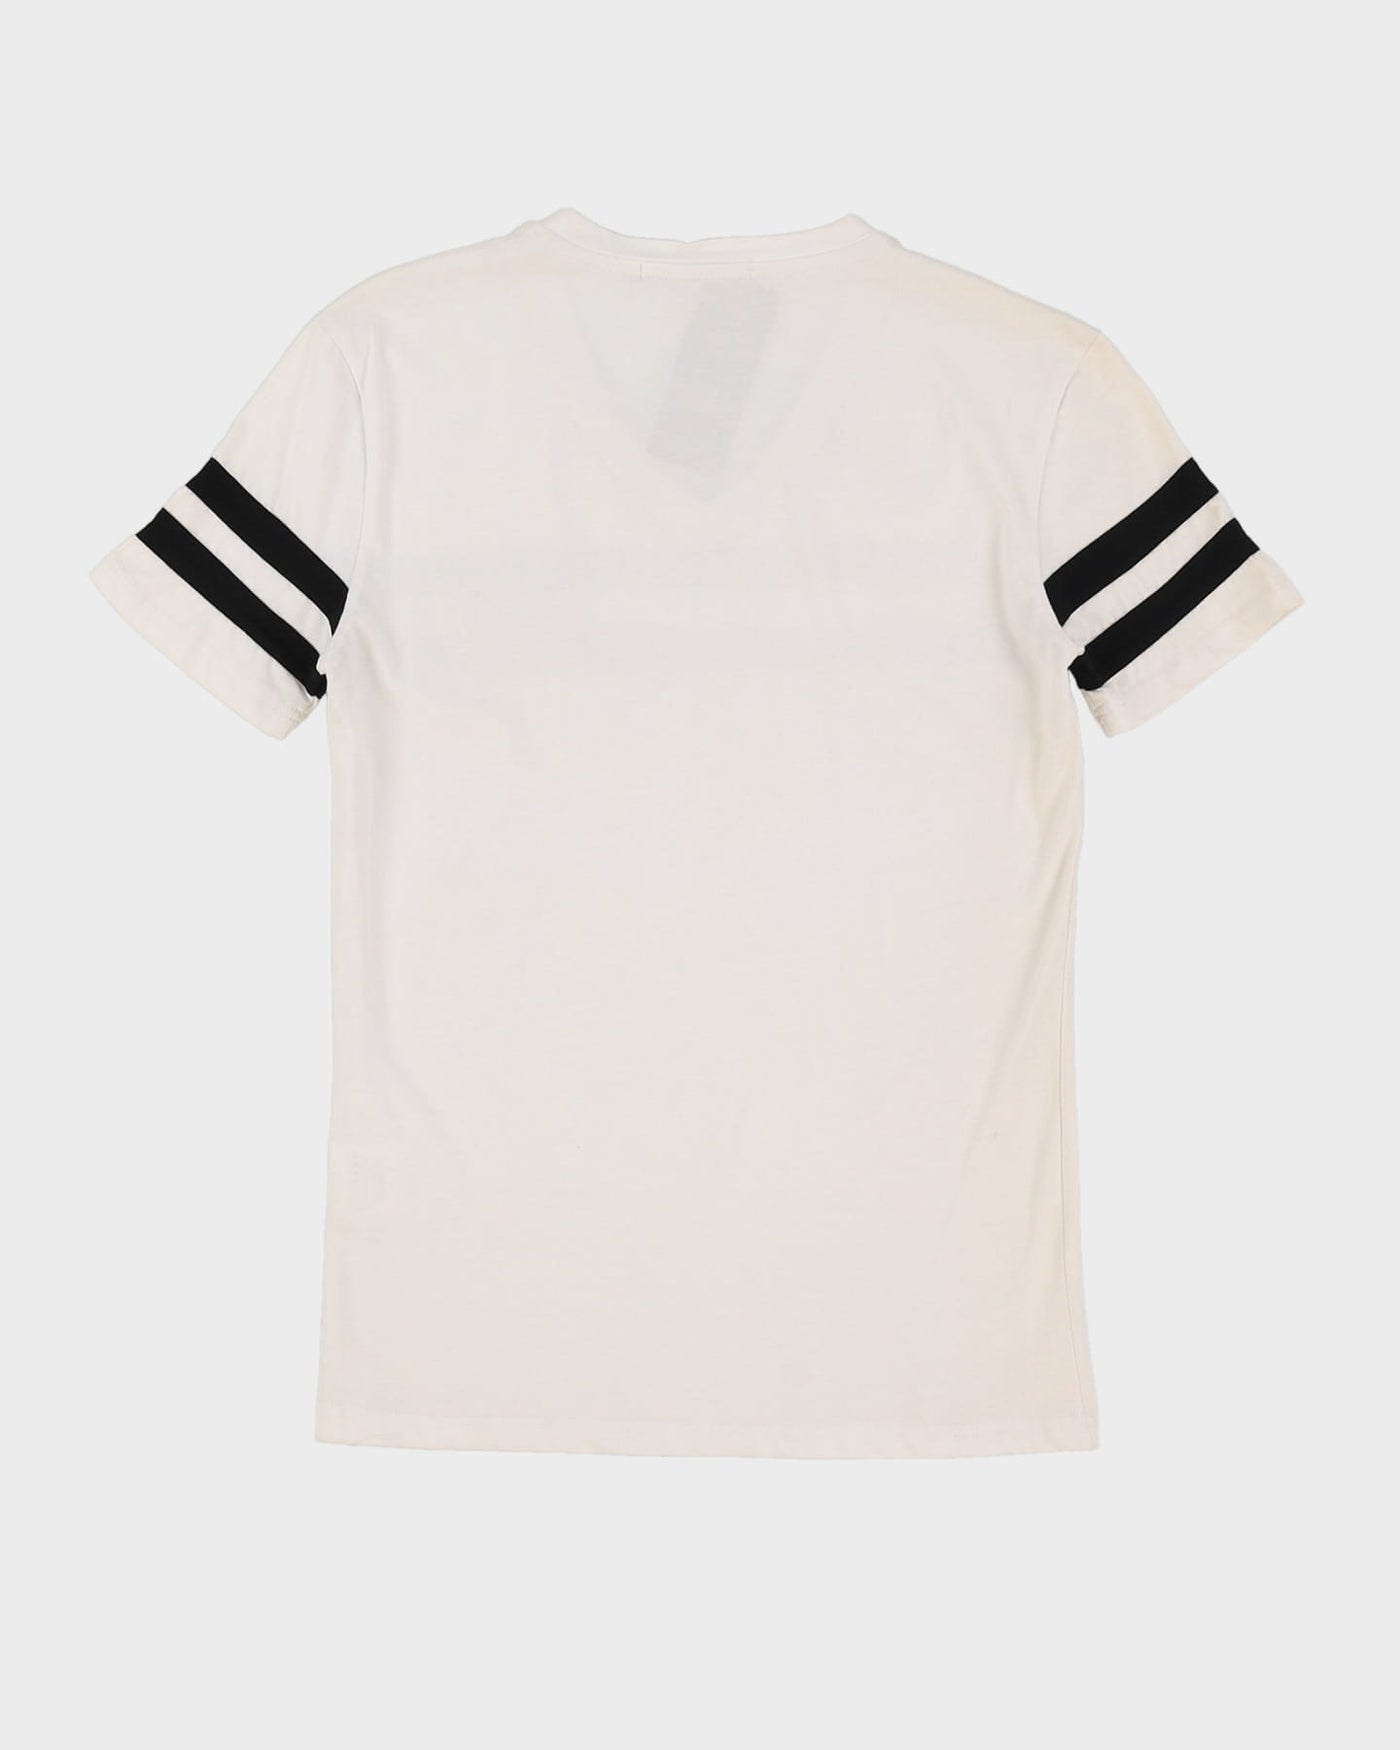 Deadstock With Tags Dolce & Gabbana White T-Shirt - M